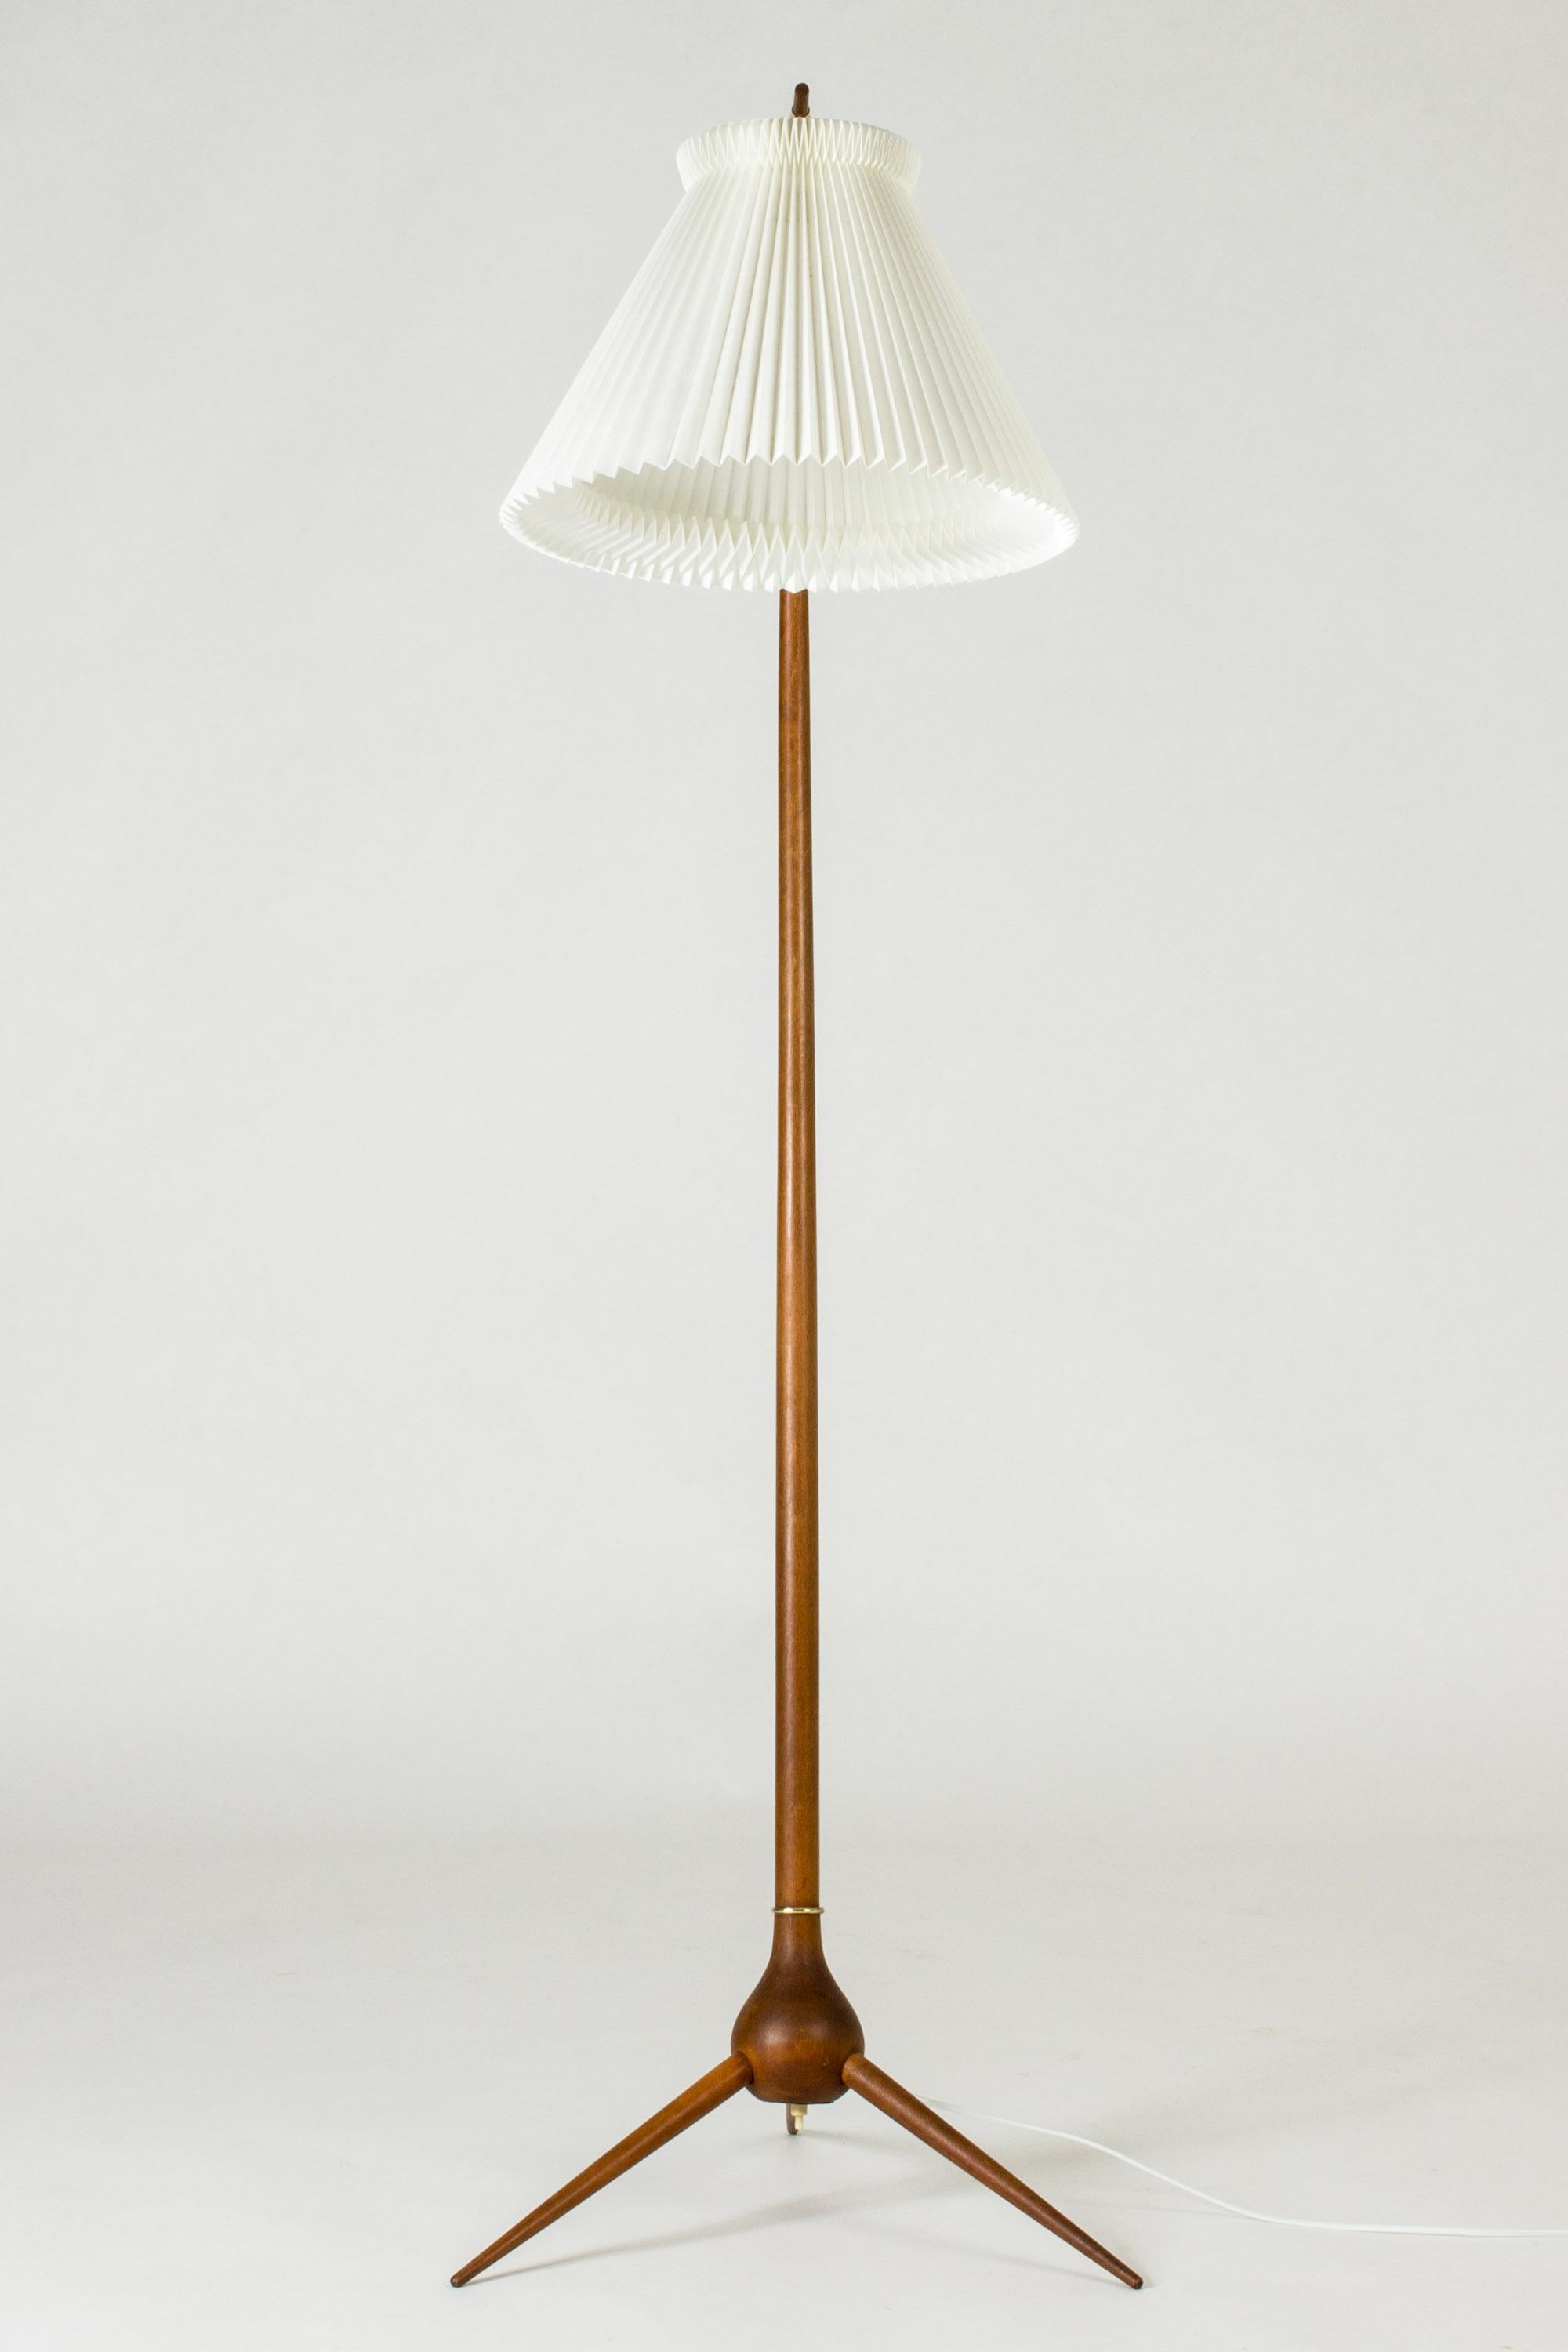 Amazing “Bridge” floor lamp by Severin Hansen. The stem is made from teak bent into an elegant curve, with the cord visible running along the back. Three feet in an onion-shaped joint with a brass detail. Beautiful, organic design, Le Klint lamp